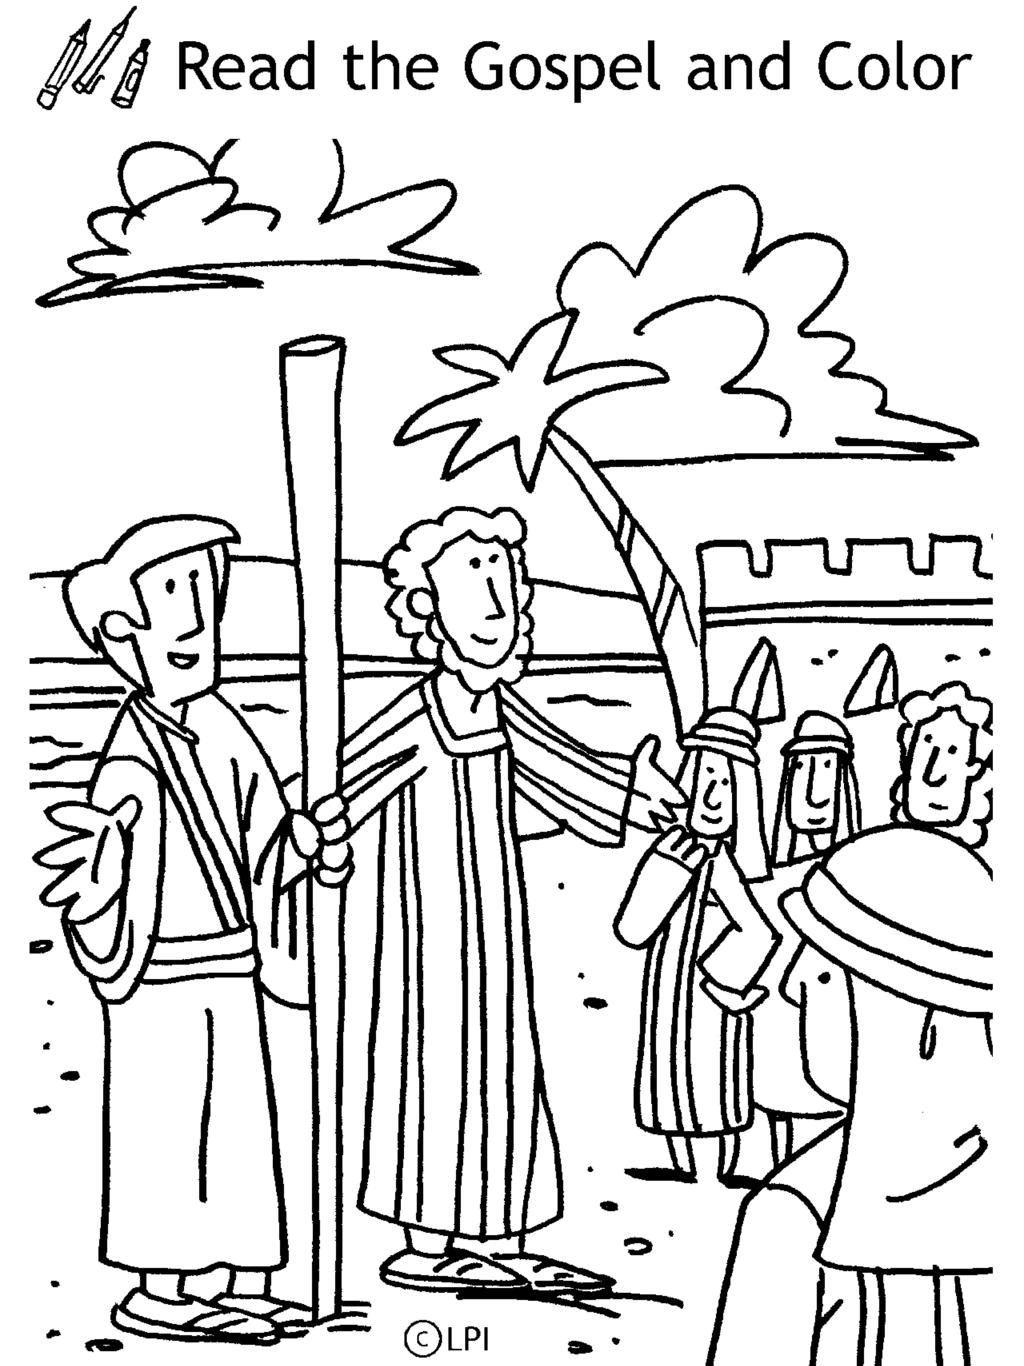 In this week s Gospel, Jesus sends the disciples out on a mission. He tells them not to pack anything except a walking stick.